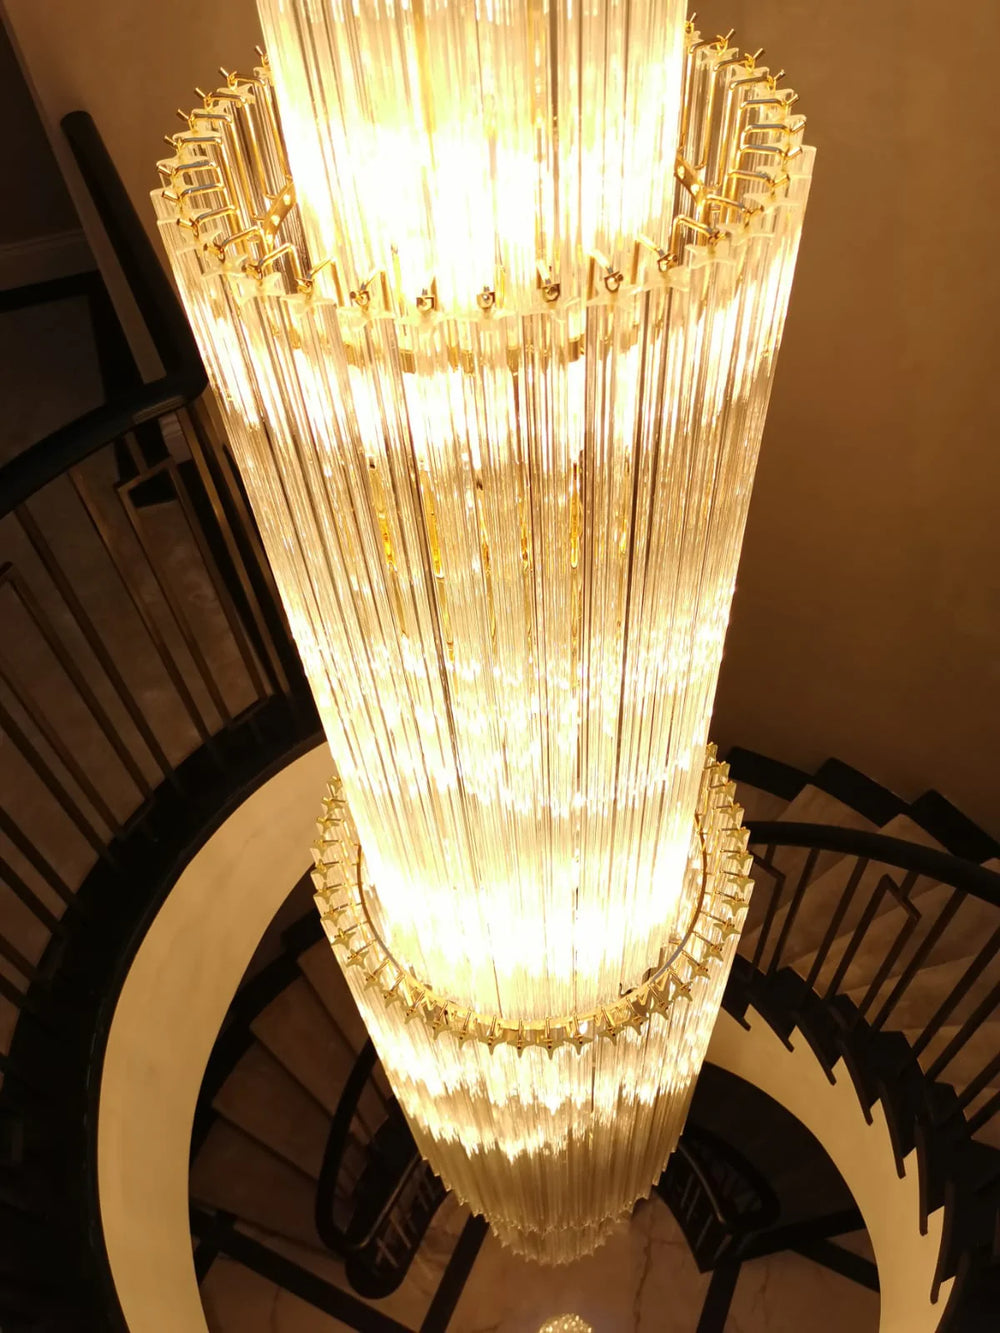 Large Bespoke Murano Glass Prism Staircase Chandelier With Extra Long Glass Prism Elements